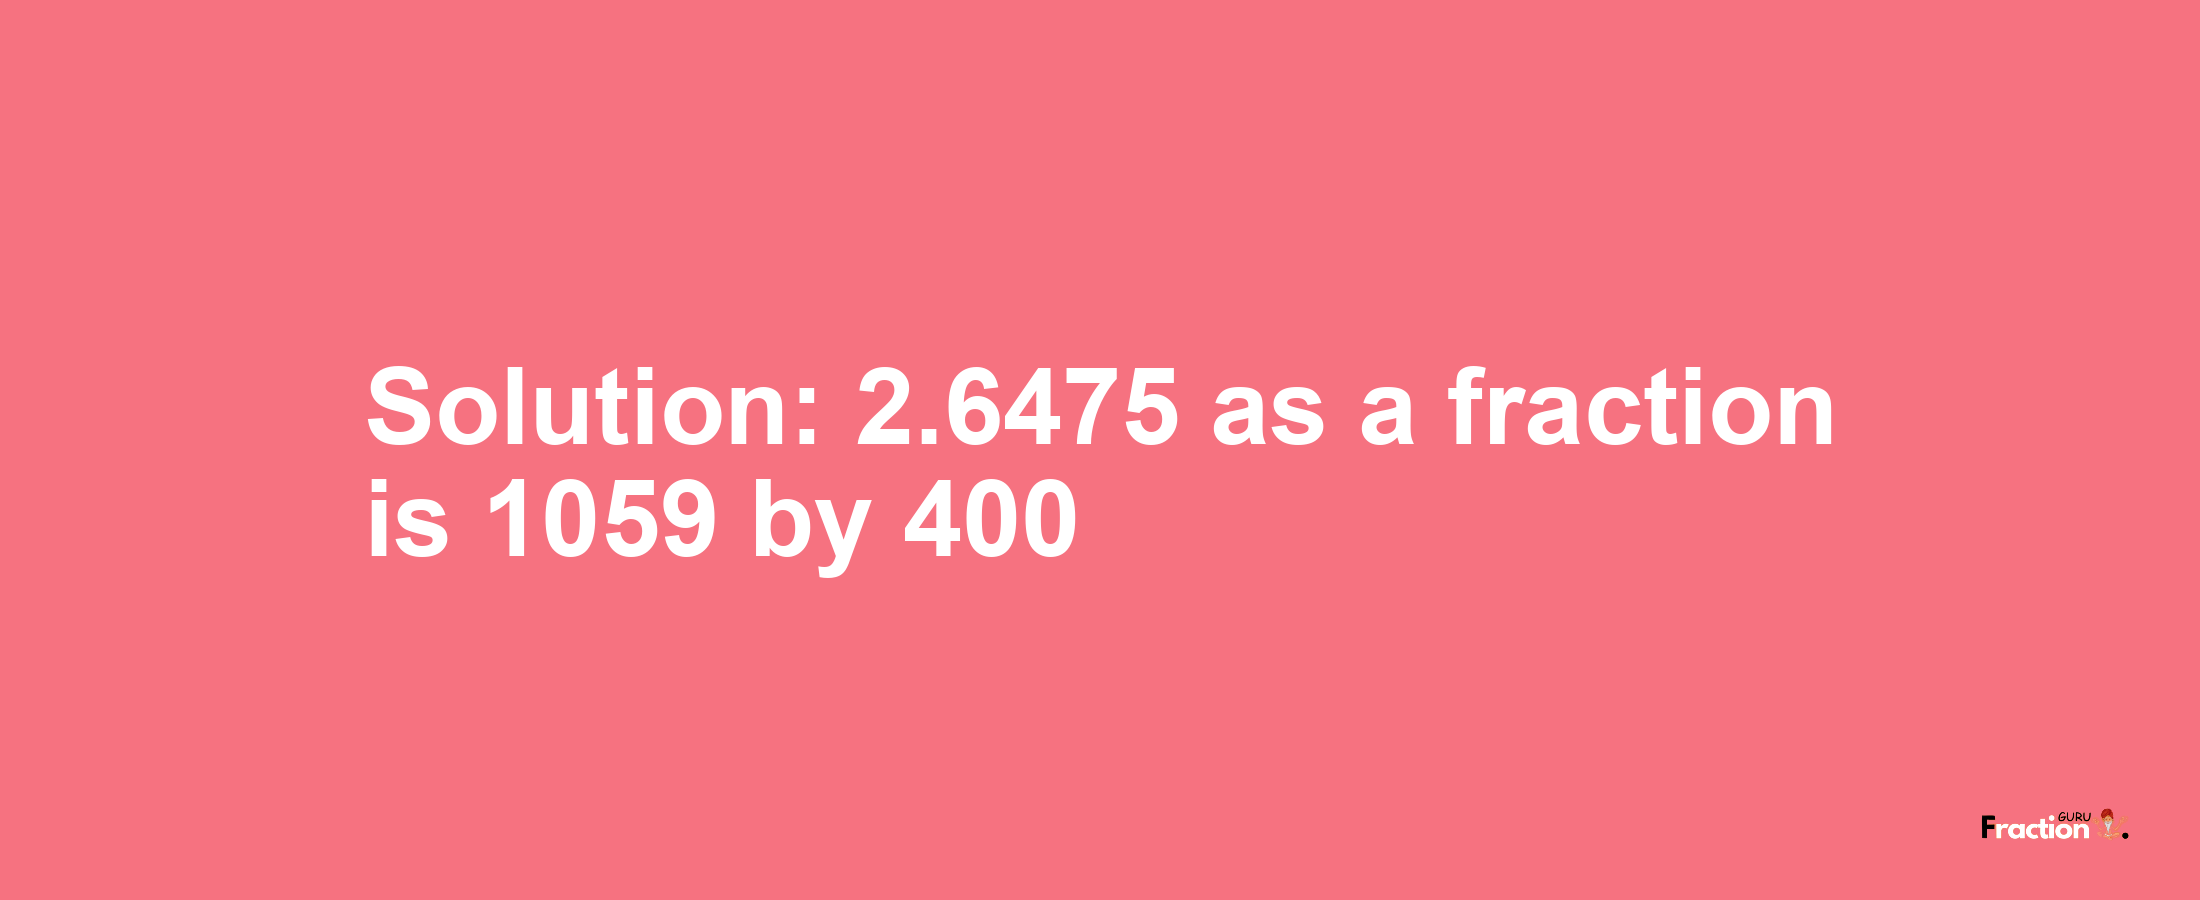 Solution:2.6475 as a fraction is 1059/400